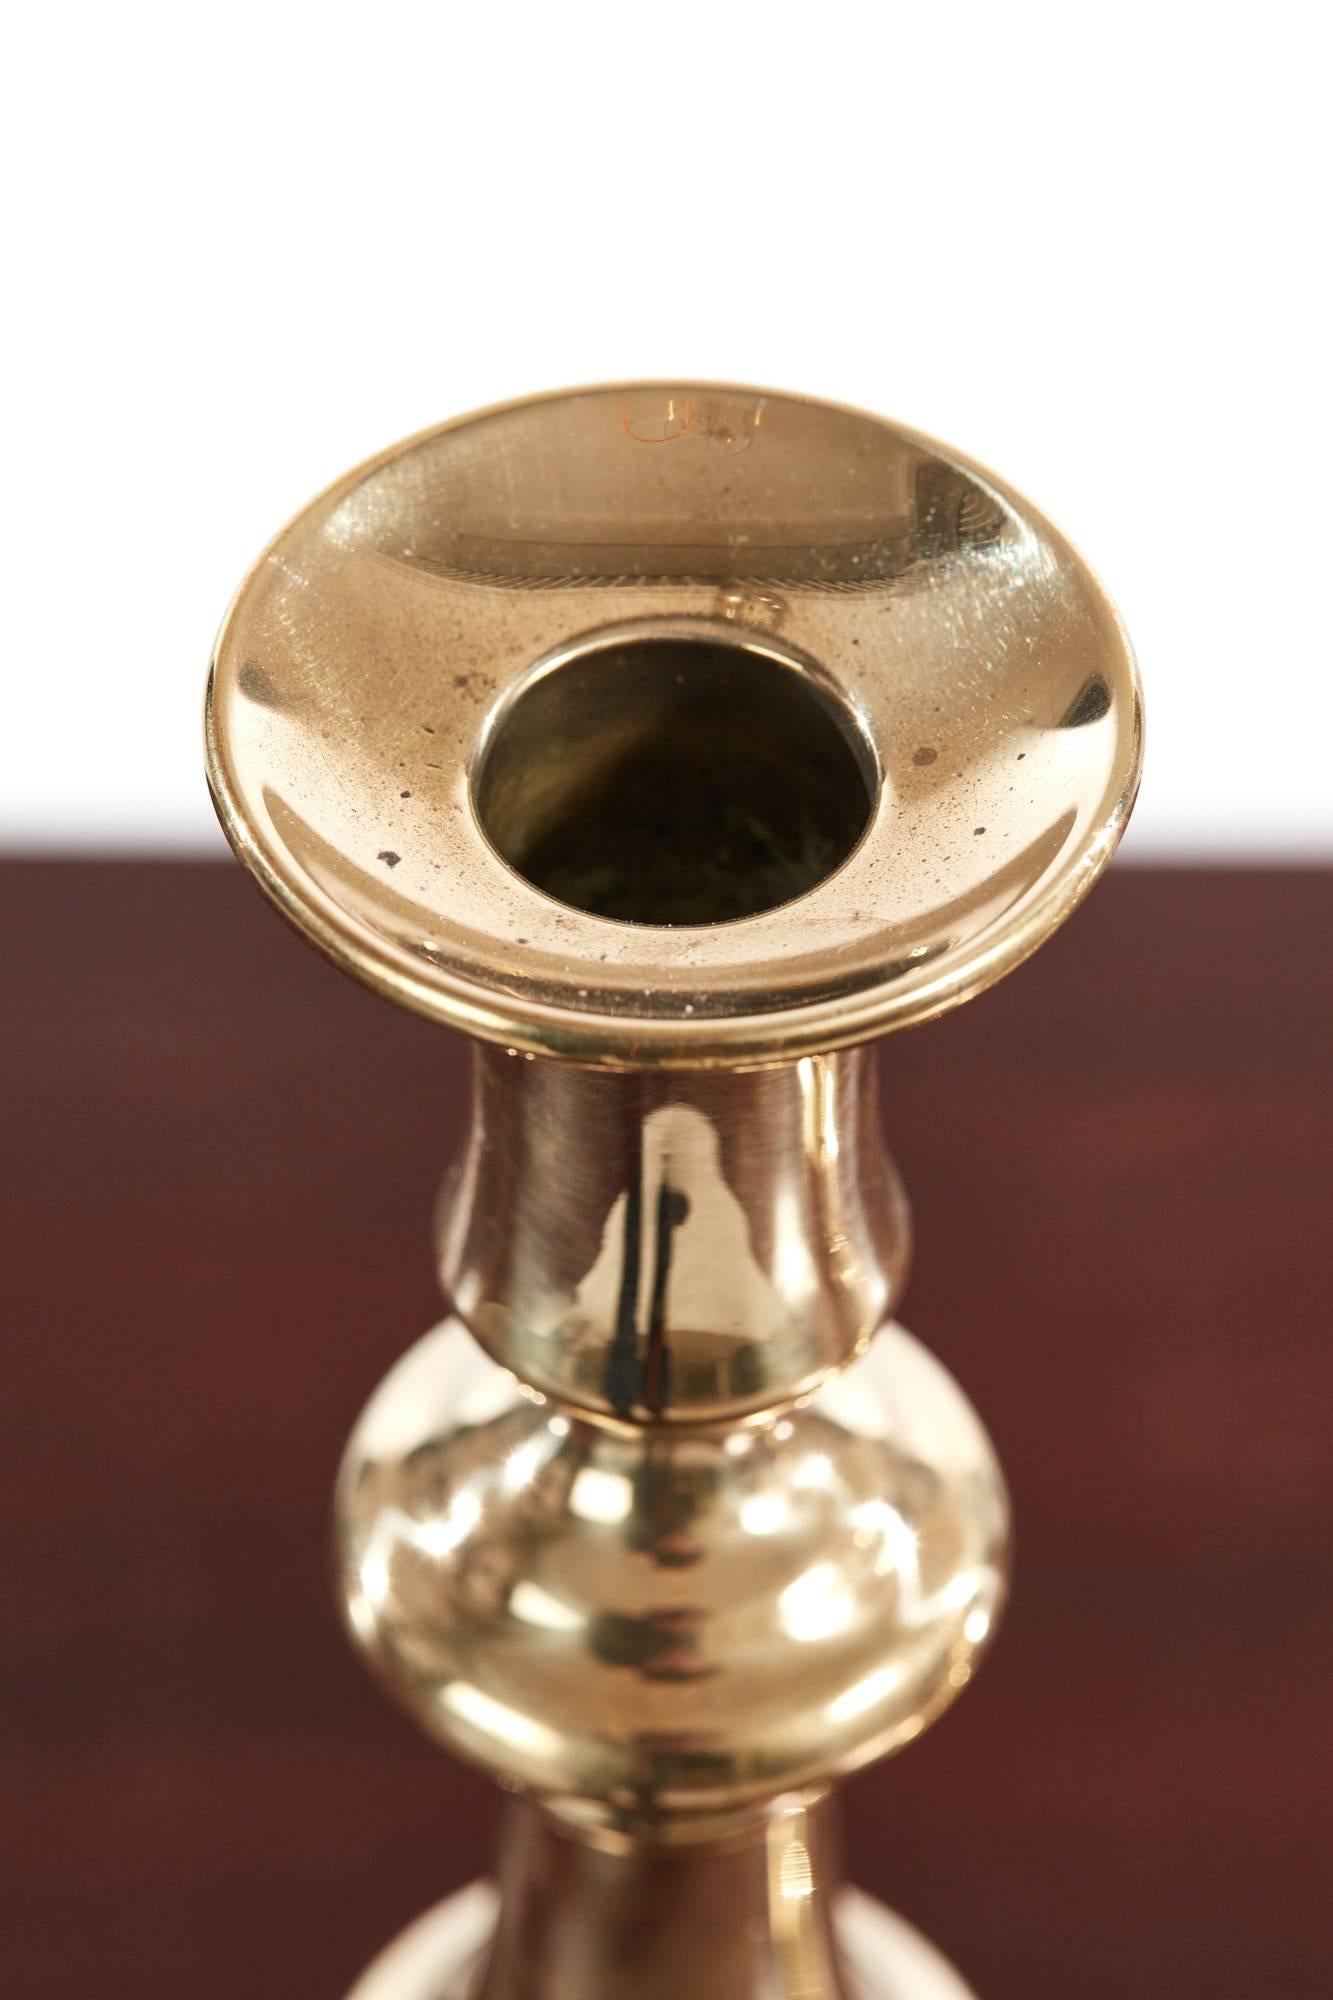 Pair of antique brass candlesticks, with a shaped tapering column, rising from a stepped round base, each candlestick still retains its original push ejector rod.